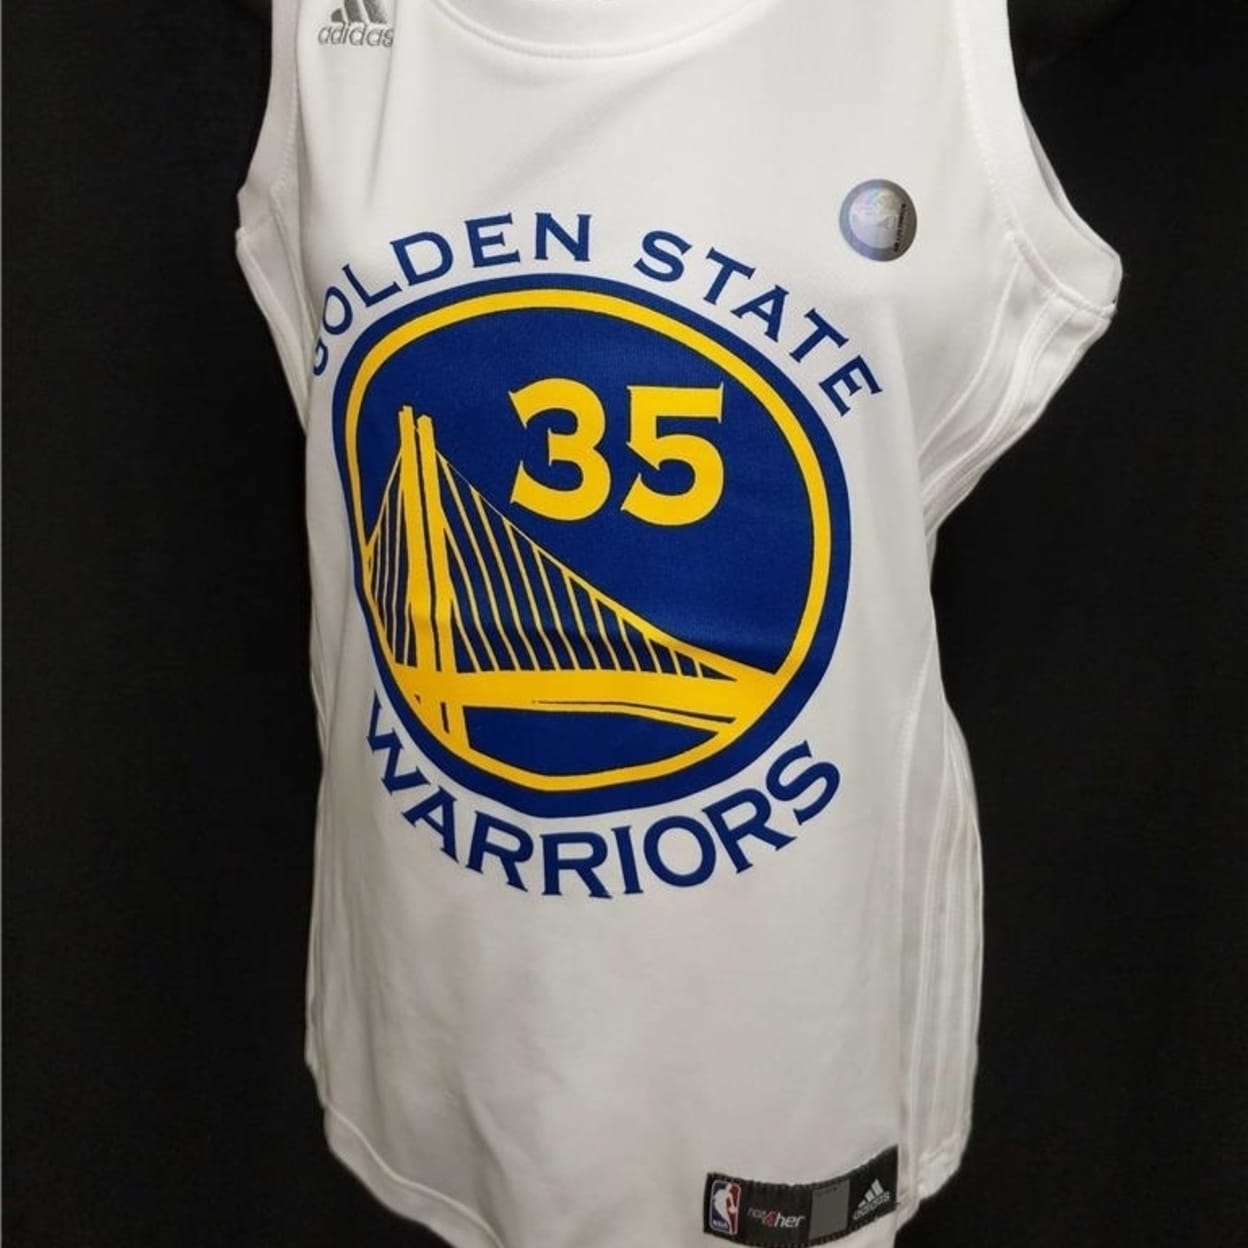 kevin durant jersey womens